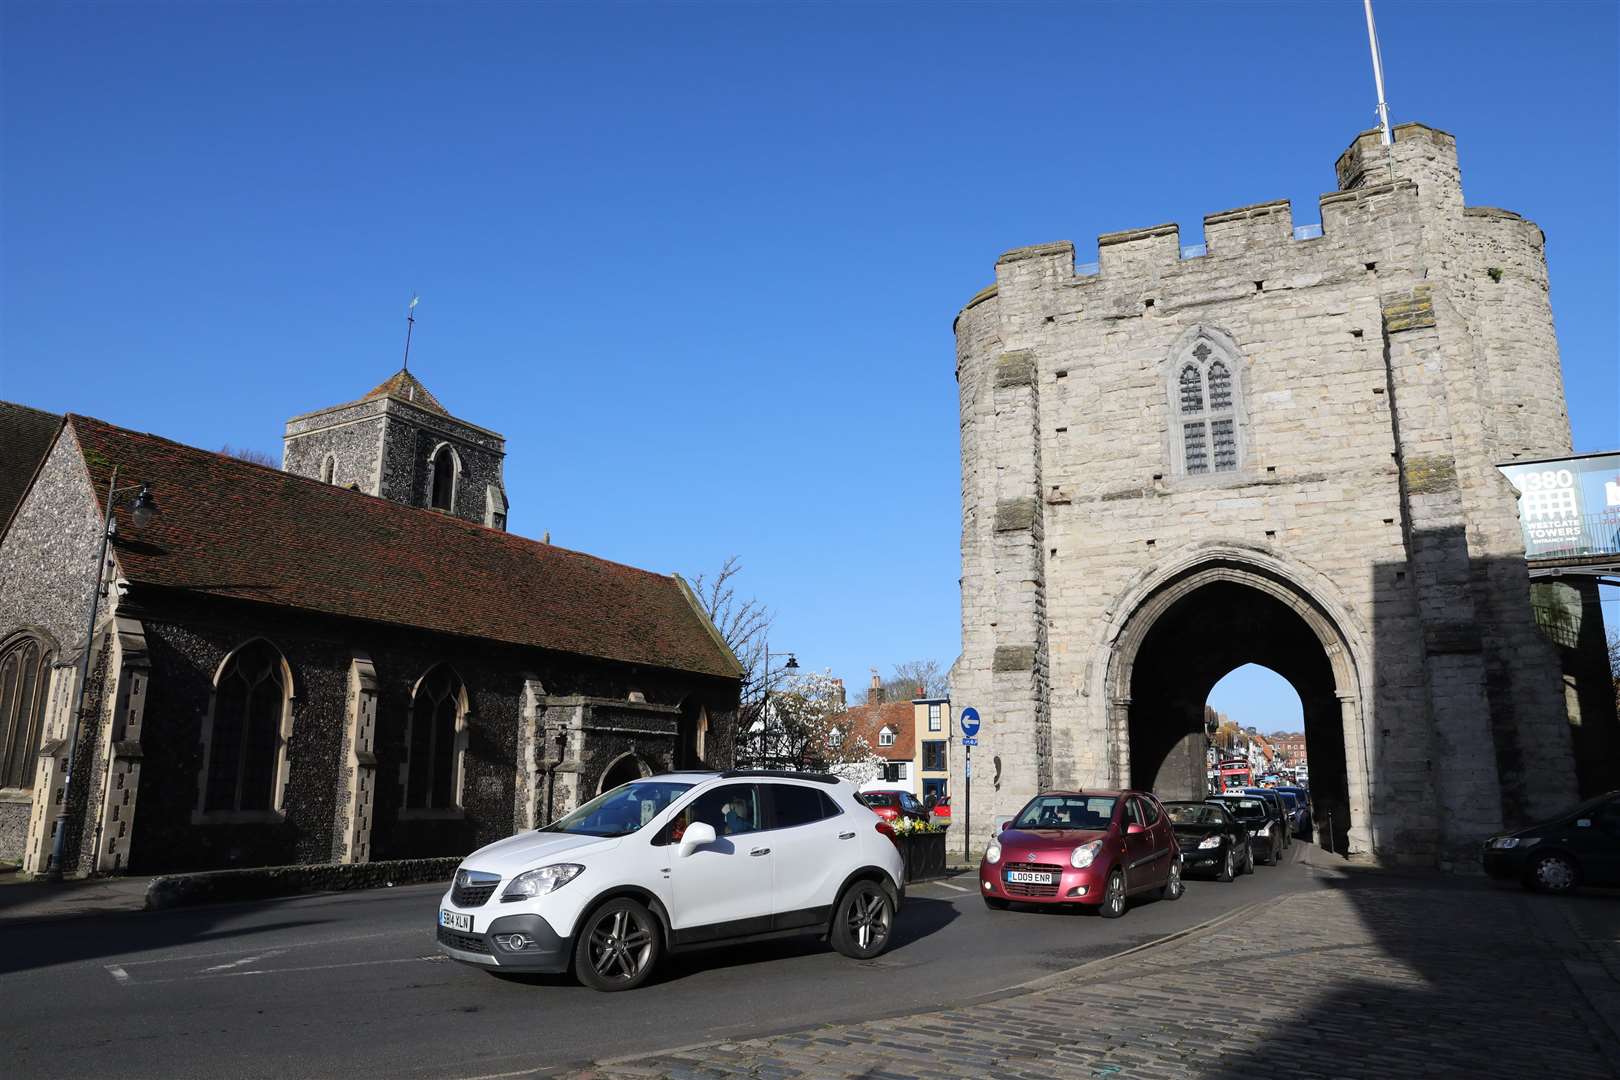 The area outside Westgate Towers could become a new public square under the council's bold plans